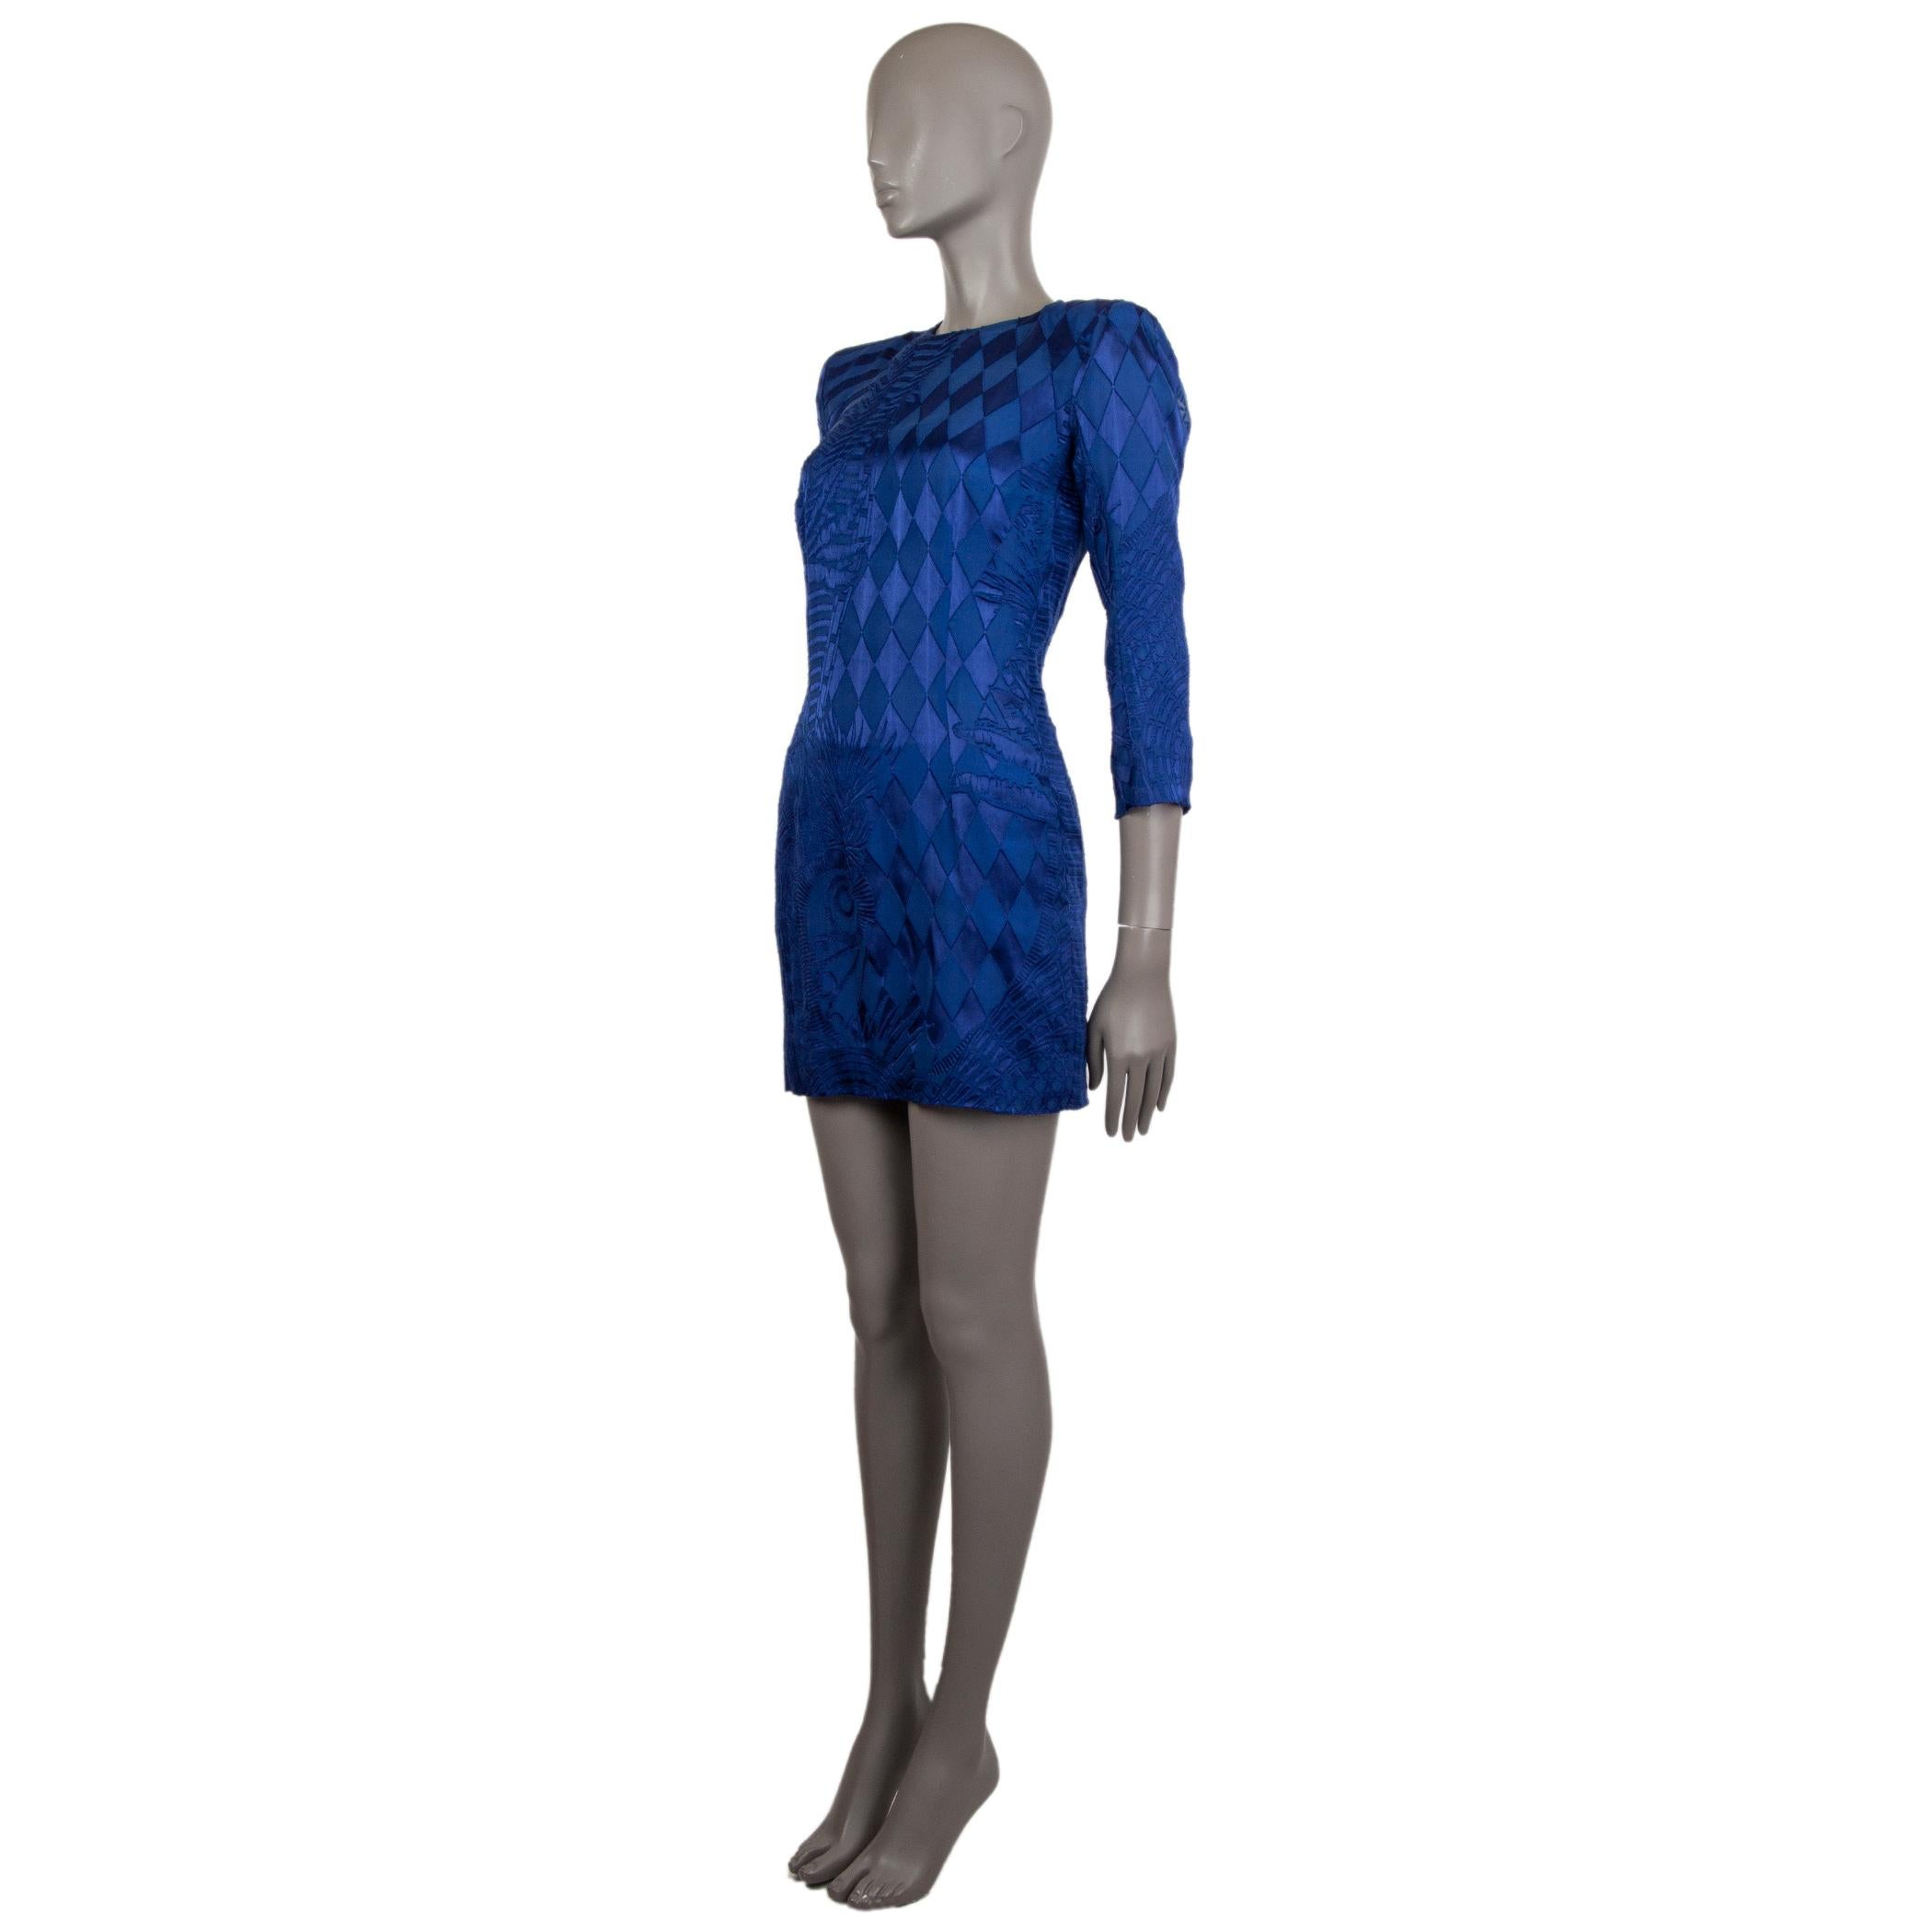 Balmain long-sleeve devore mini dress in royal blue viscose (85%) and silk (15%). With crew neck and padded shoulders. Closes with silver-tone zipper on the back. Lined in royal blue silk (100%). Has been worn and is in excellent condition. 

Tag